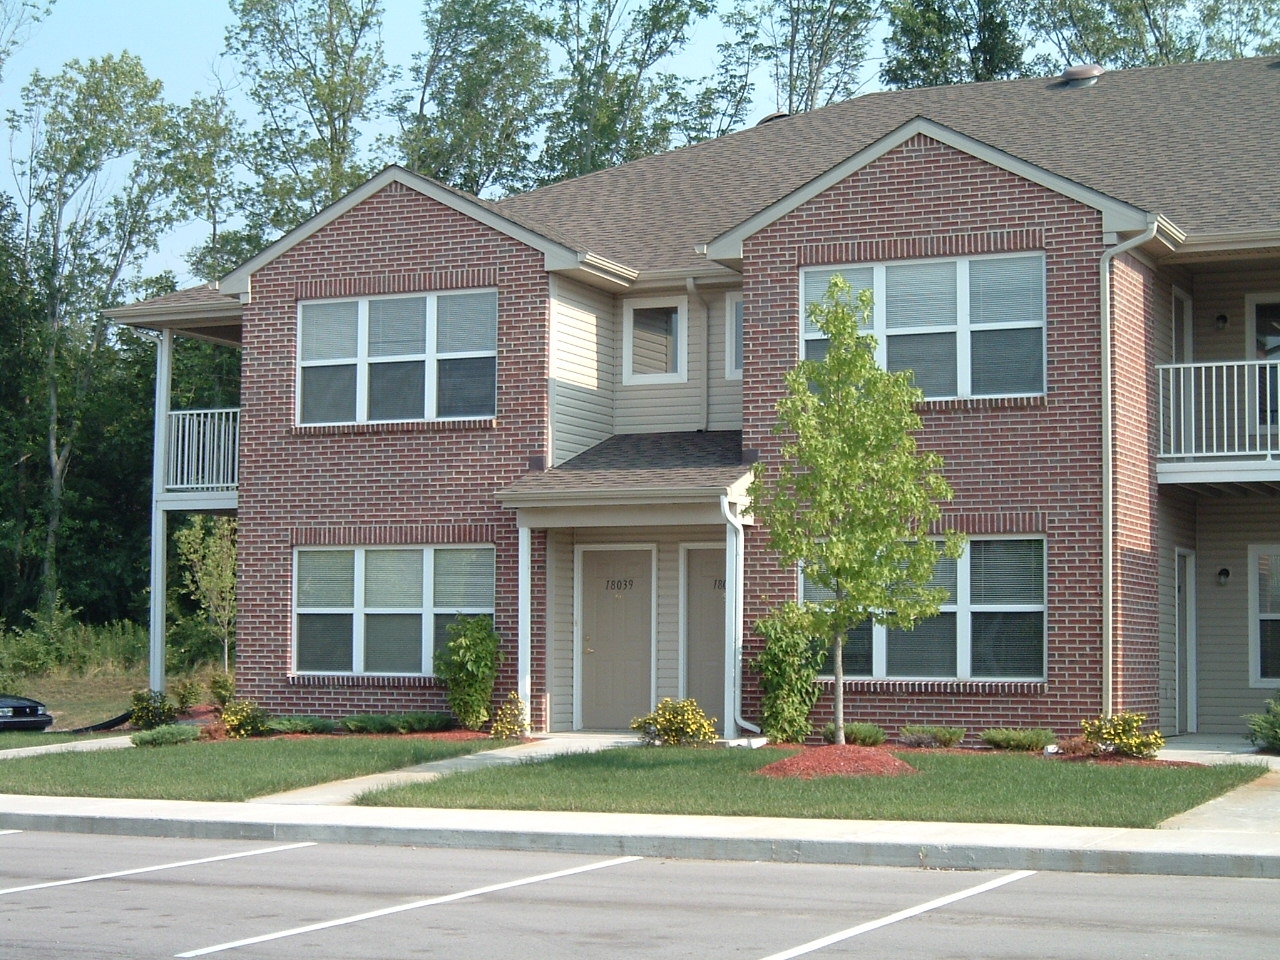 Photo of ASHTON PINES PHASE II. Affordable housing located at 4353 BALSAM FIR LN ELKHART, IN 46517